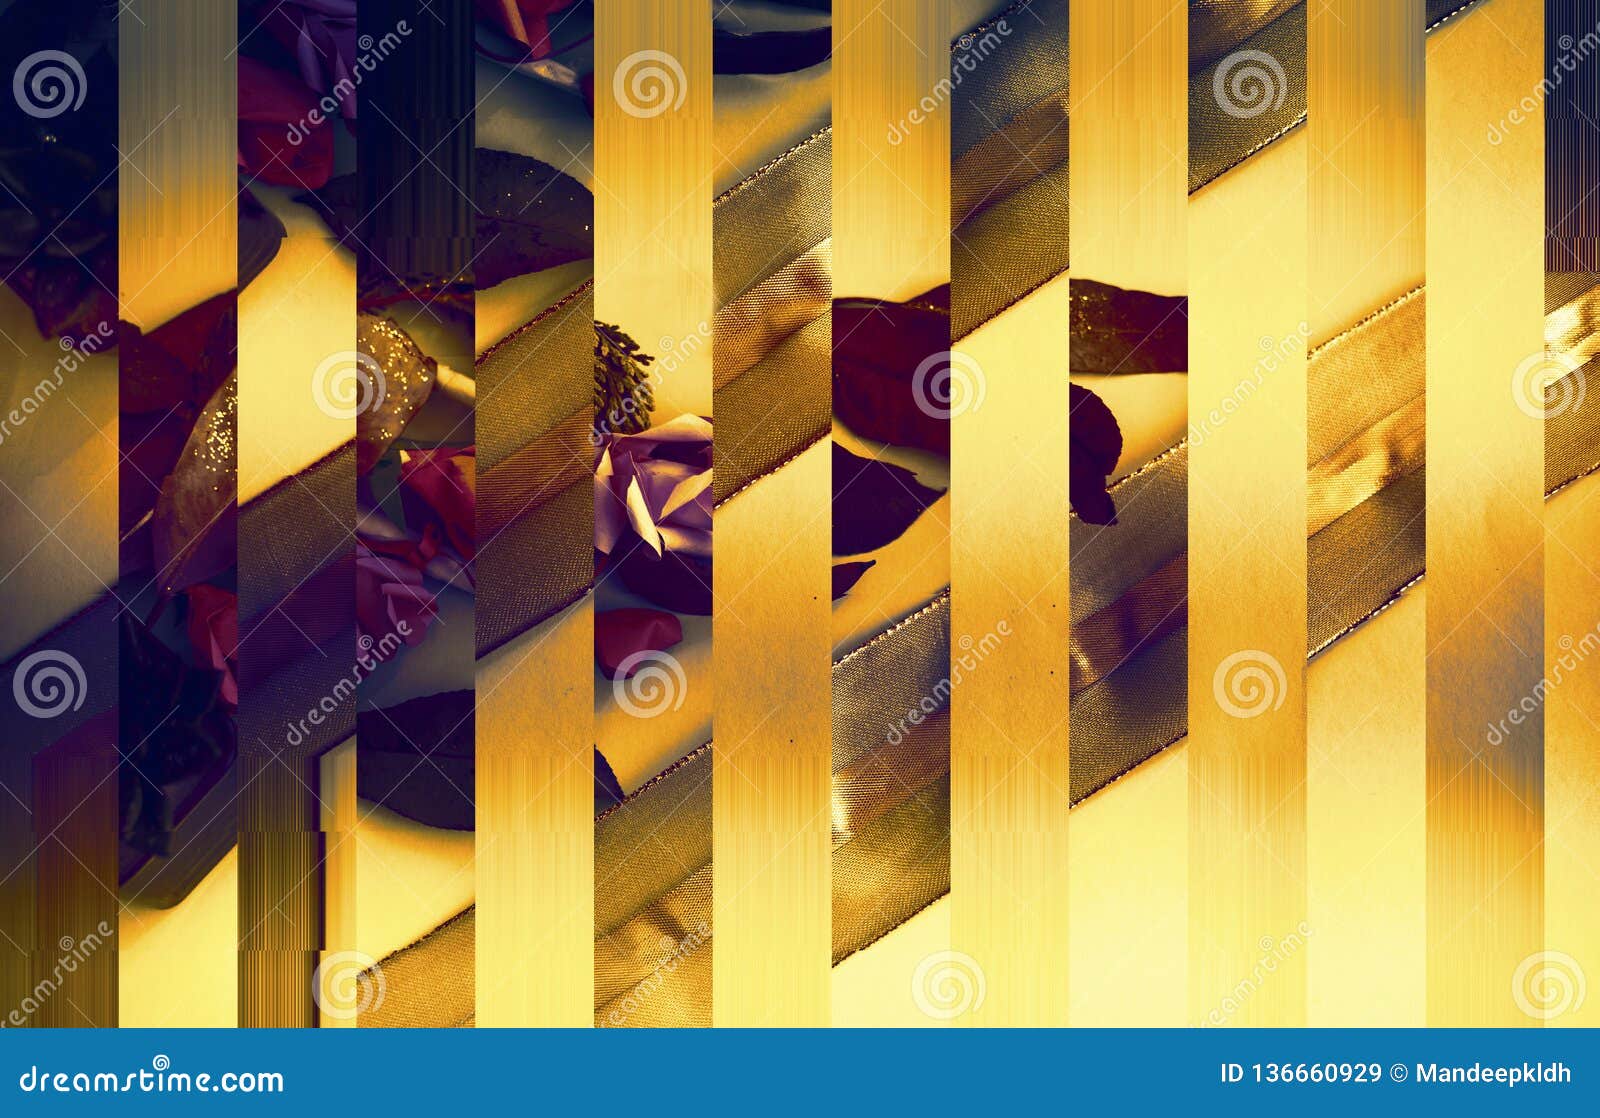 Handmade Paper Craft. Luxurious Candle Gold Shade Background. Fall Theme  Cozy & Comfortable Rich Wallpaper. Golden Lace Art Paper. Stock Image -  Image of contemporary, candlelight: 136660929